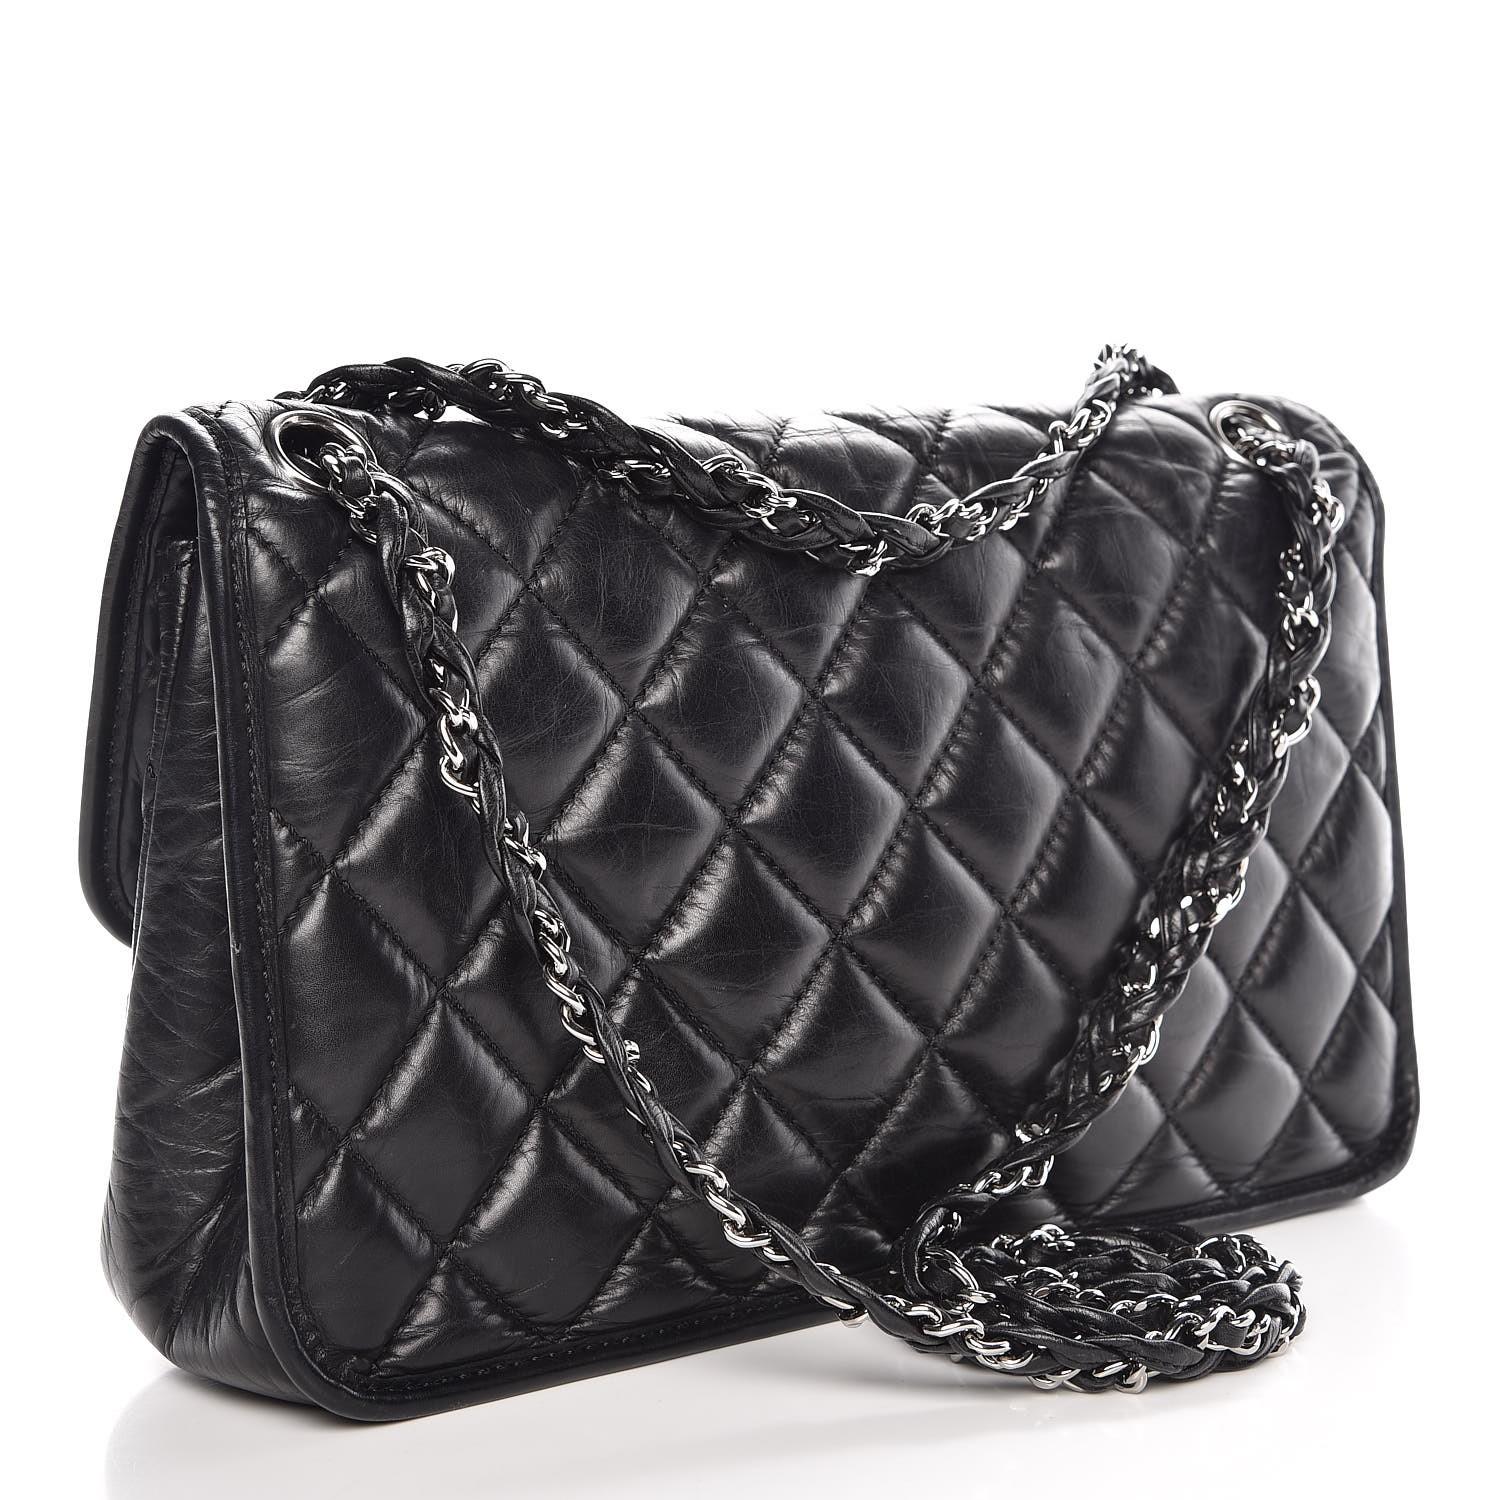 Women's or Men's Chanel 2005 Vintage Soft Distressed Leather Diamond Quilted Classic Flap Bag For Sale